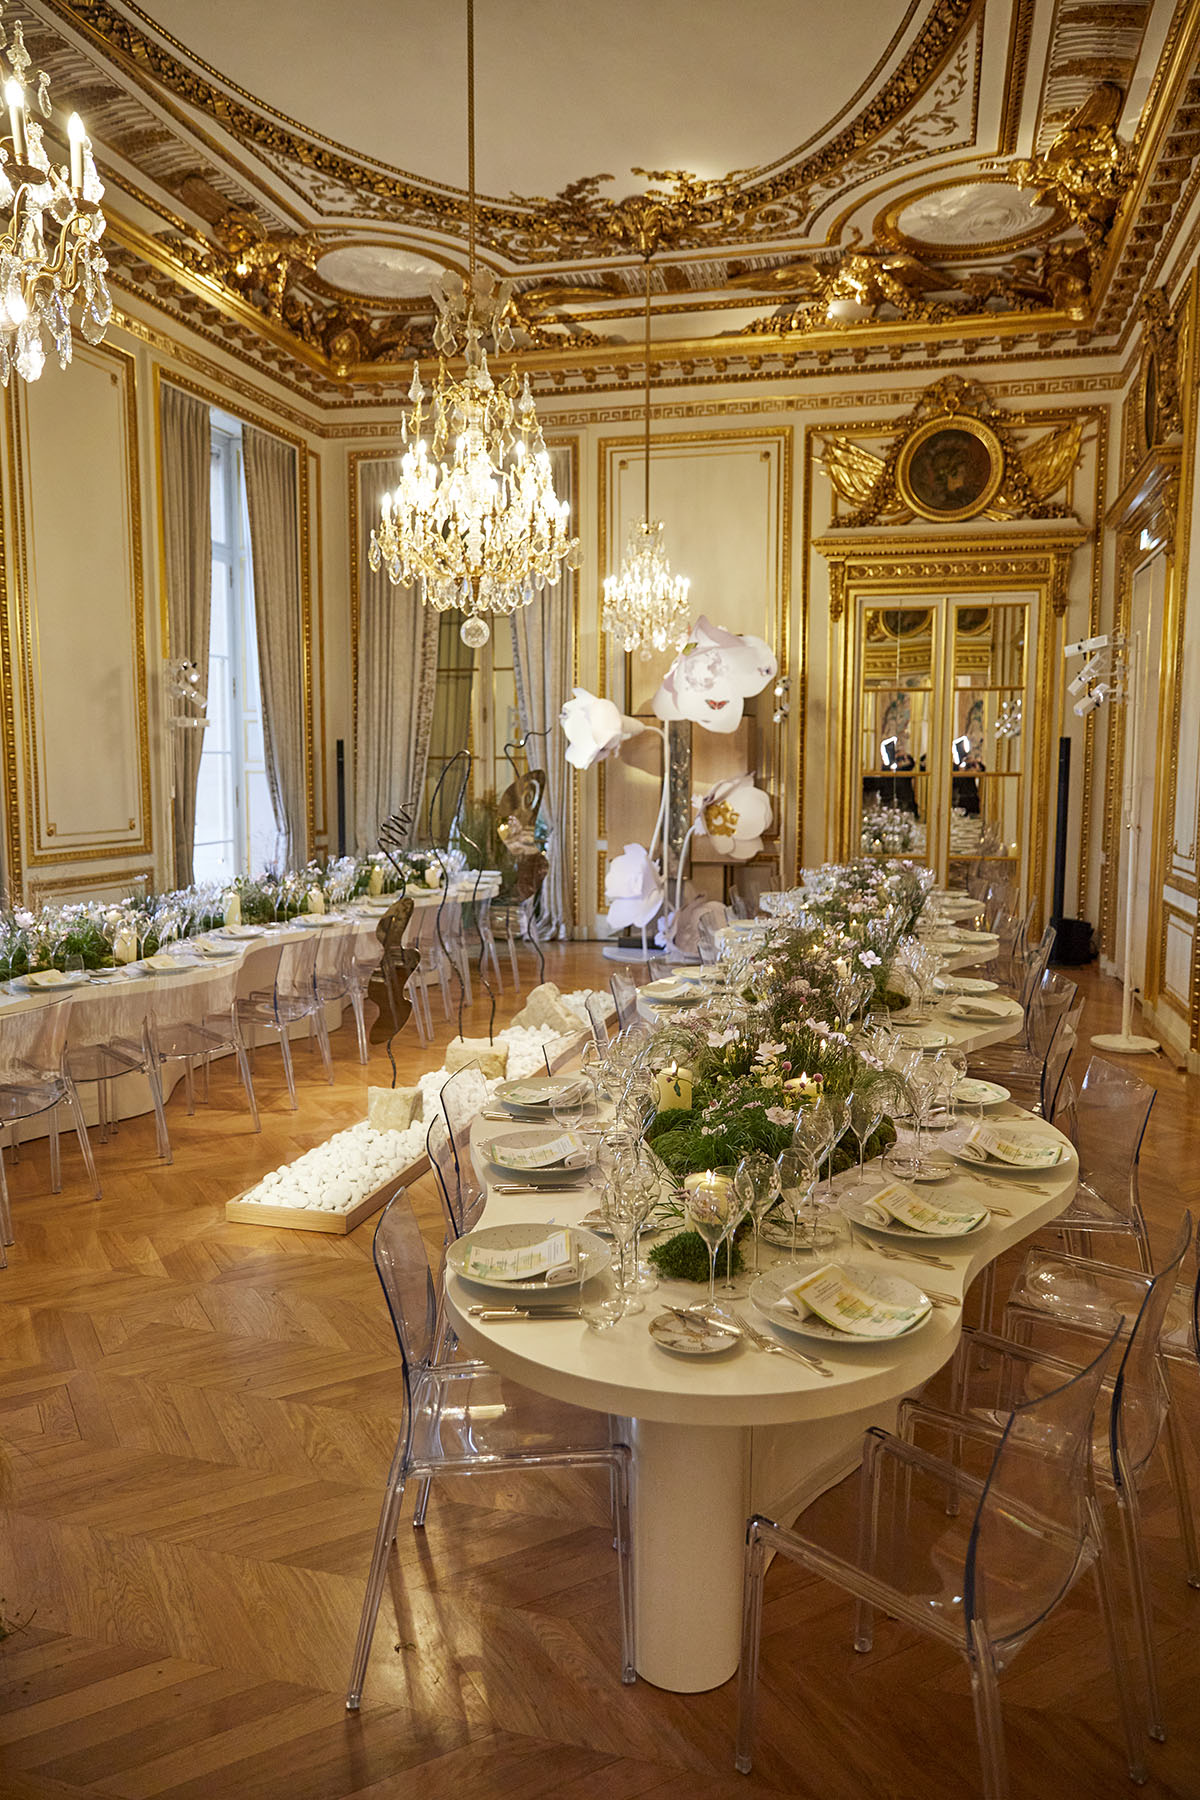 A dinner table in a white and gold room with flowers along the tables